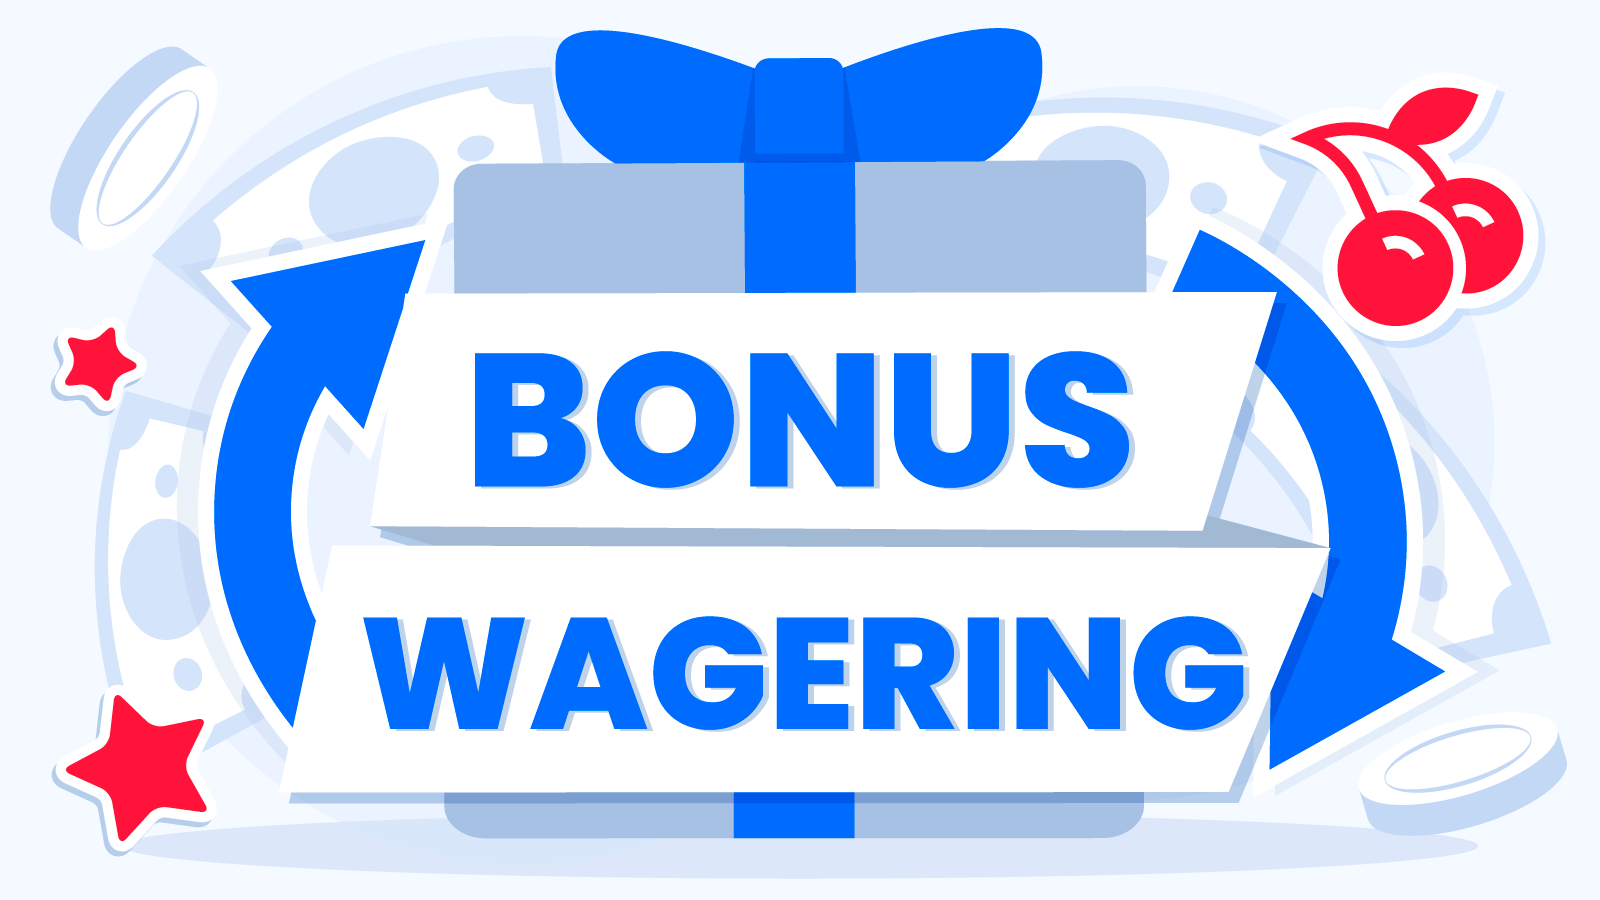 Effortless Ways to Clear the Bonus Wagering (Insider Tips to Cash in on Bonuses)